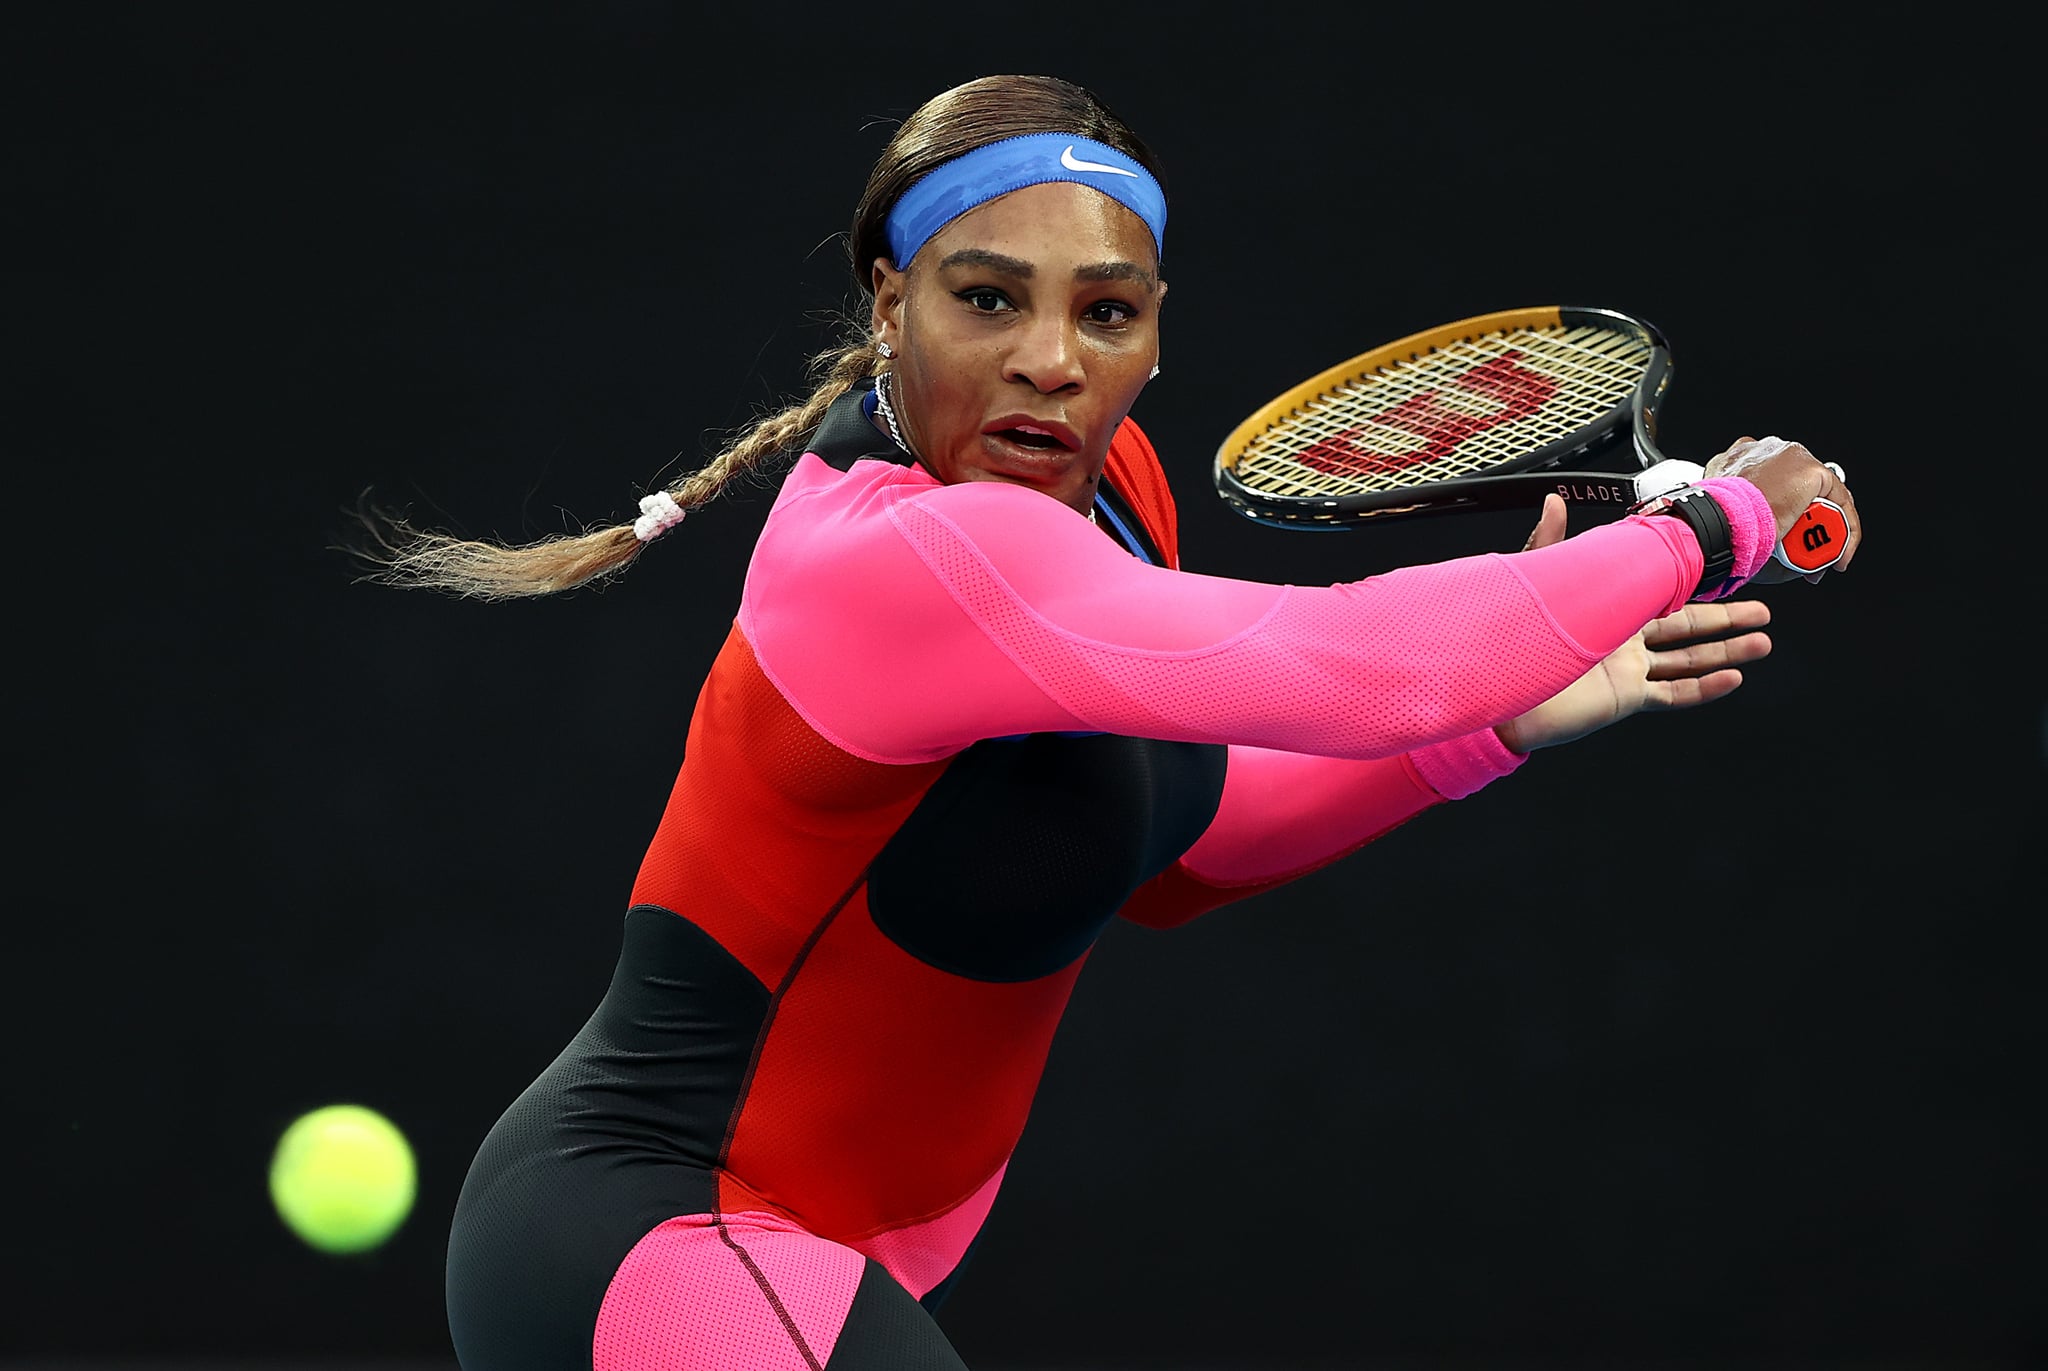 Serena Williams playing at the 2021 Australian Open